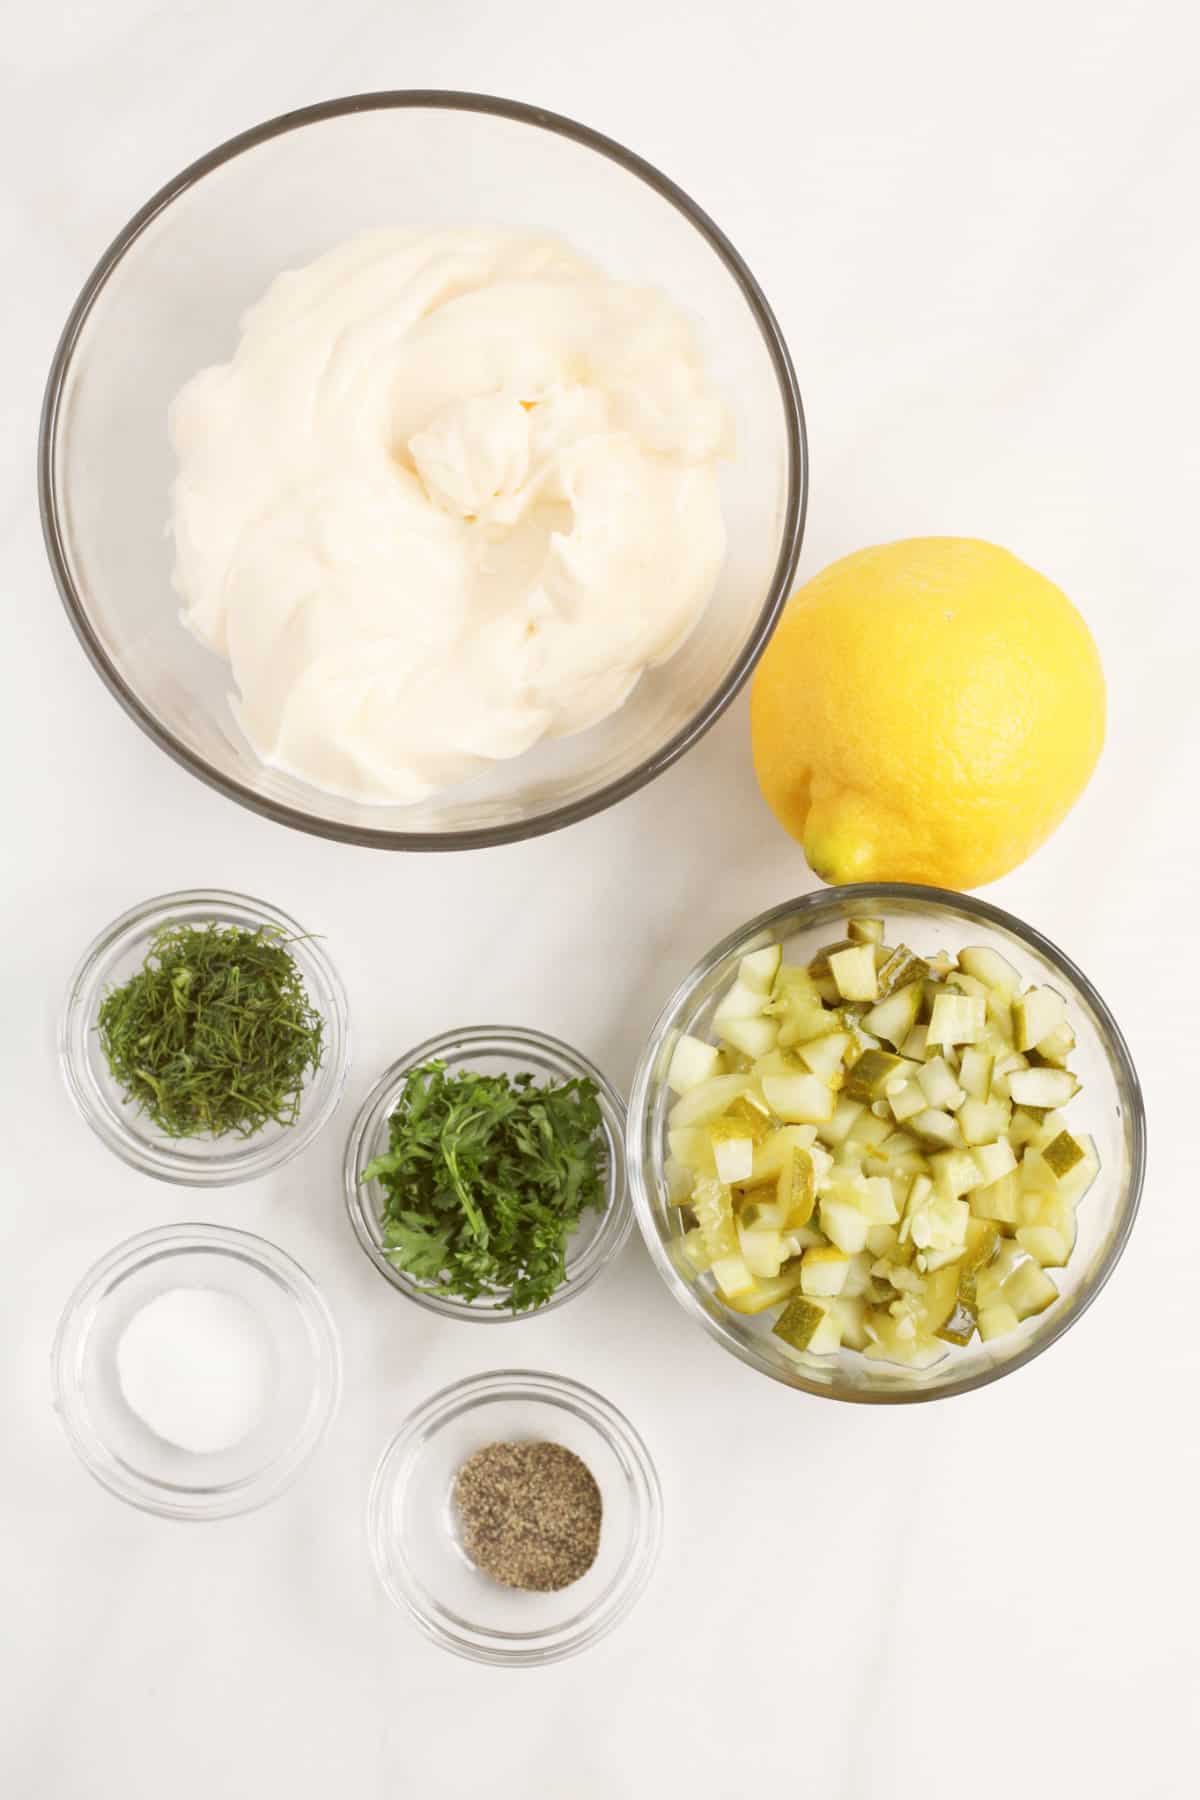 glass bowls with chopped dill pickle, chopped dill, chopped parsley, salt, pepper, lemon, and mayonnaise for making tartar sauce.